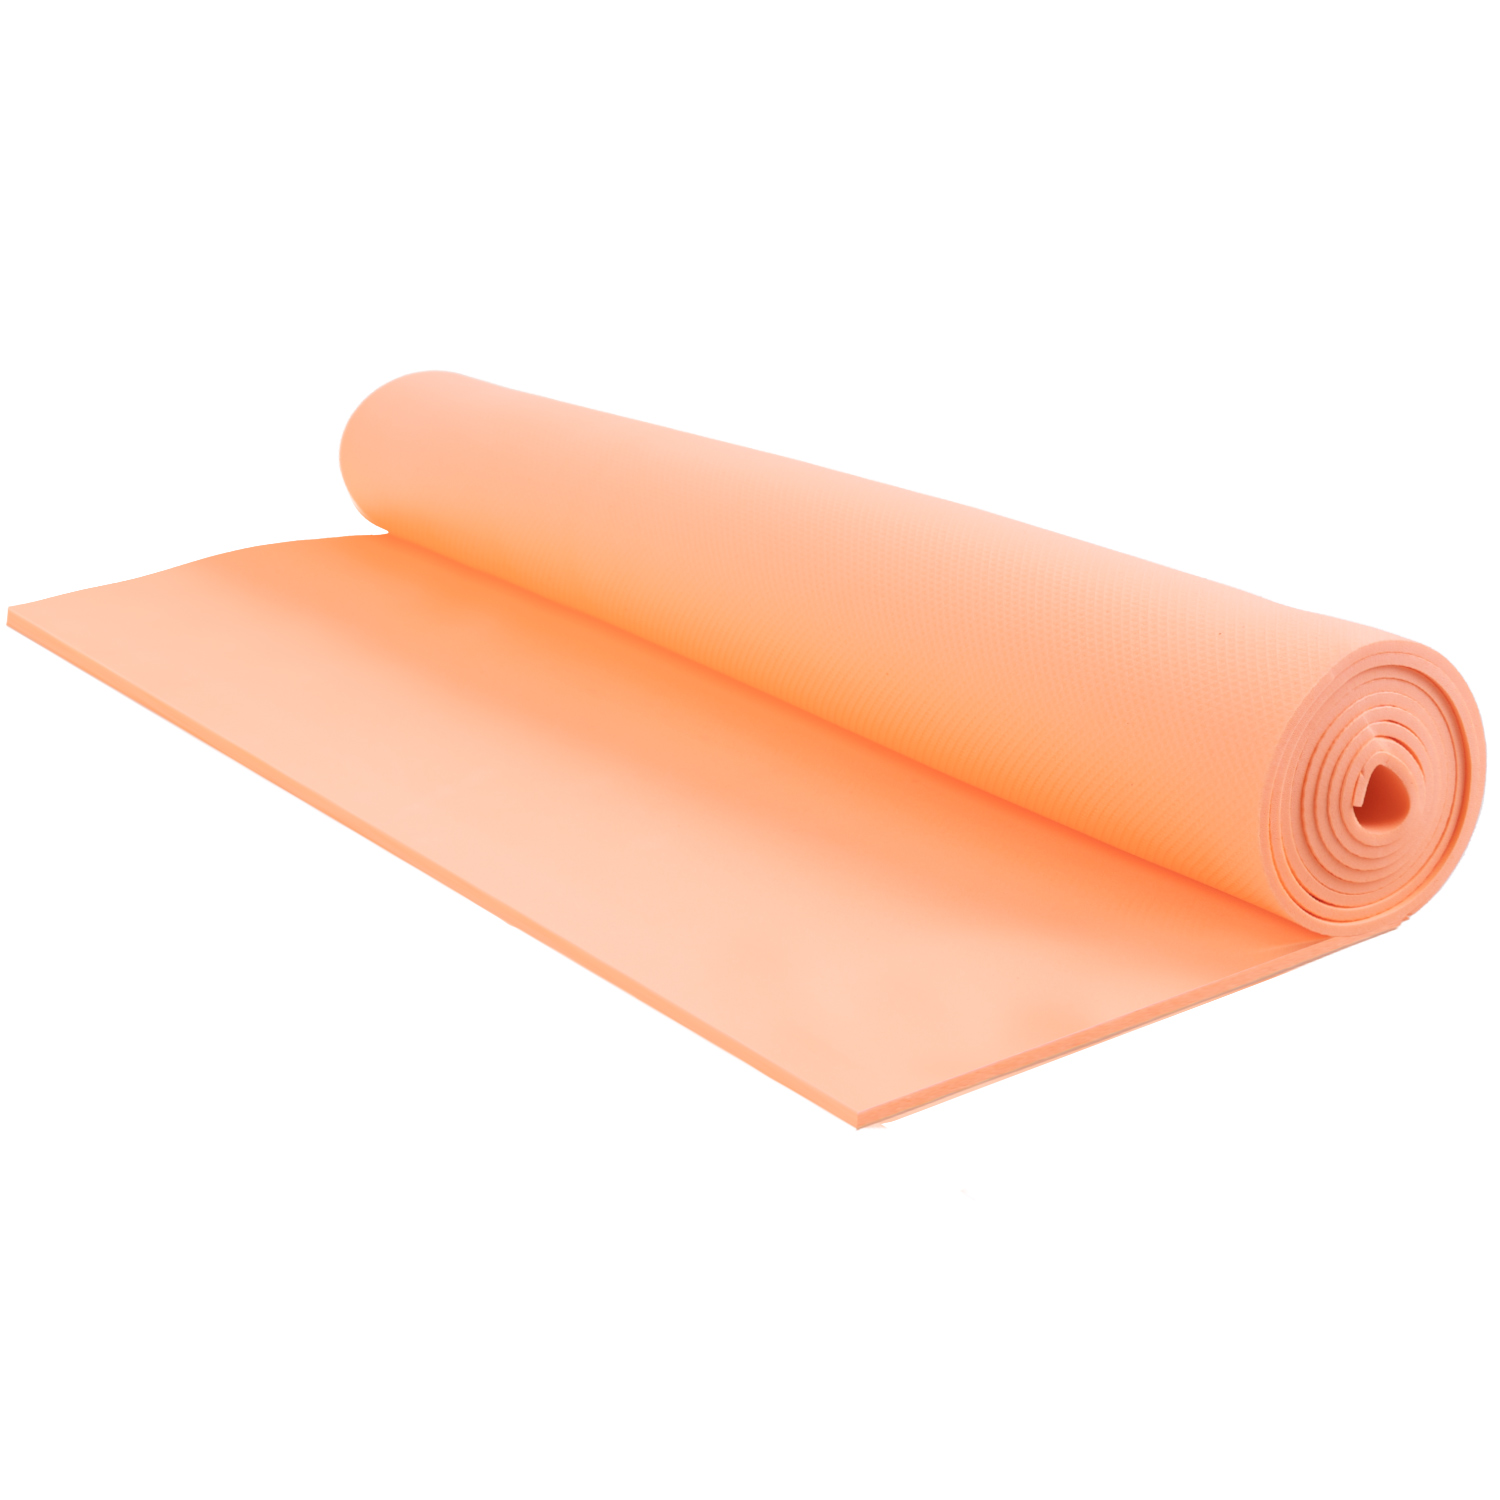 Yoga mat for exercise & fitness - Coral